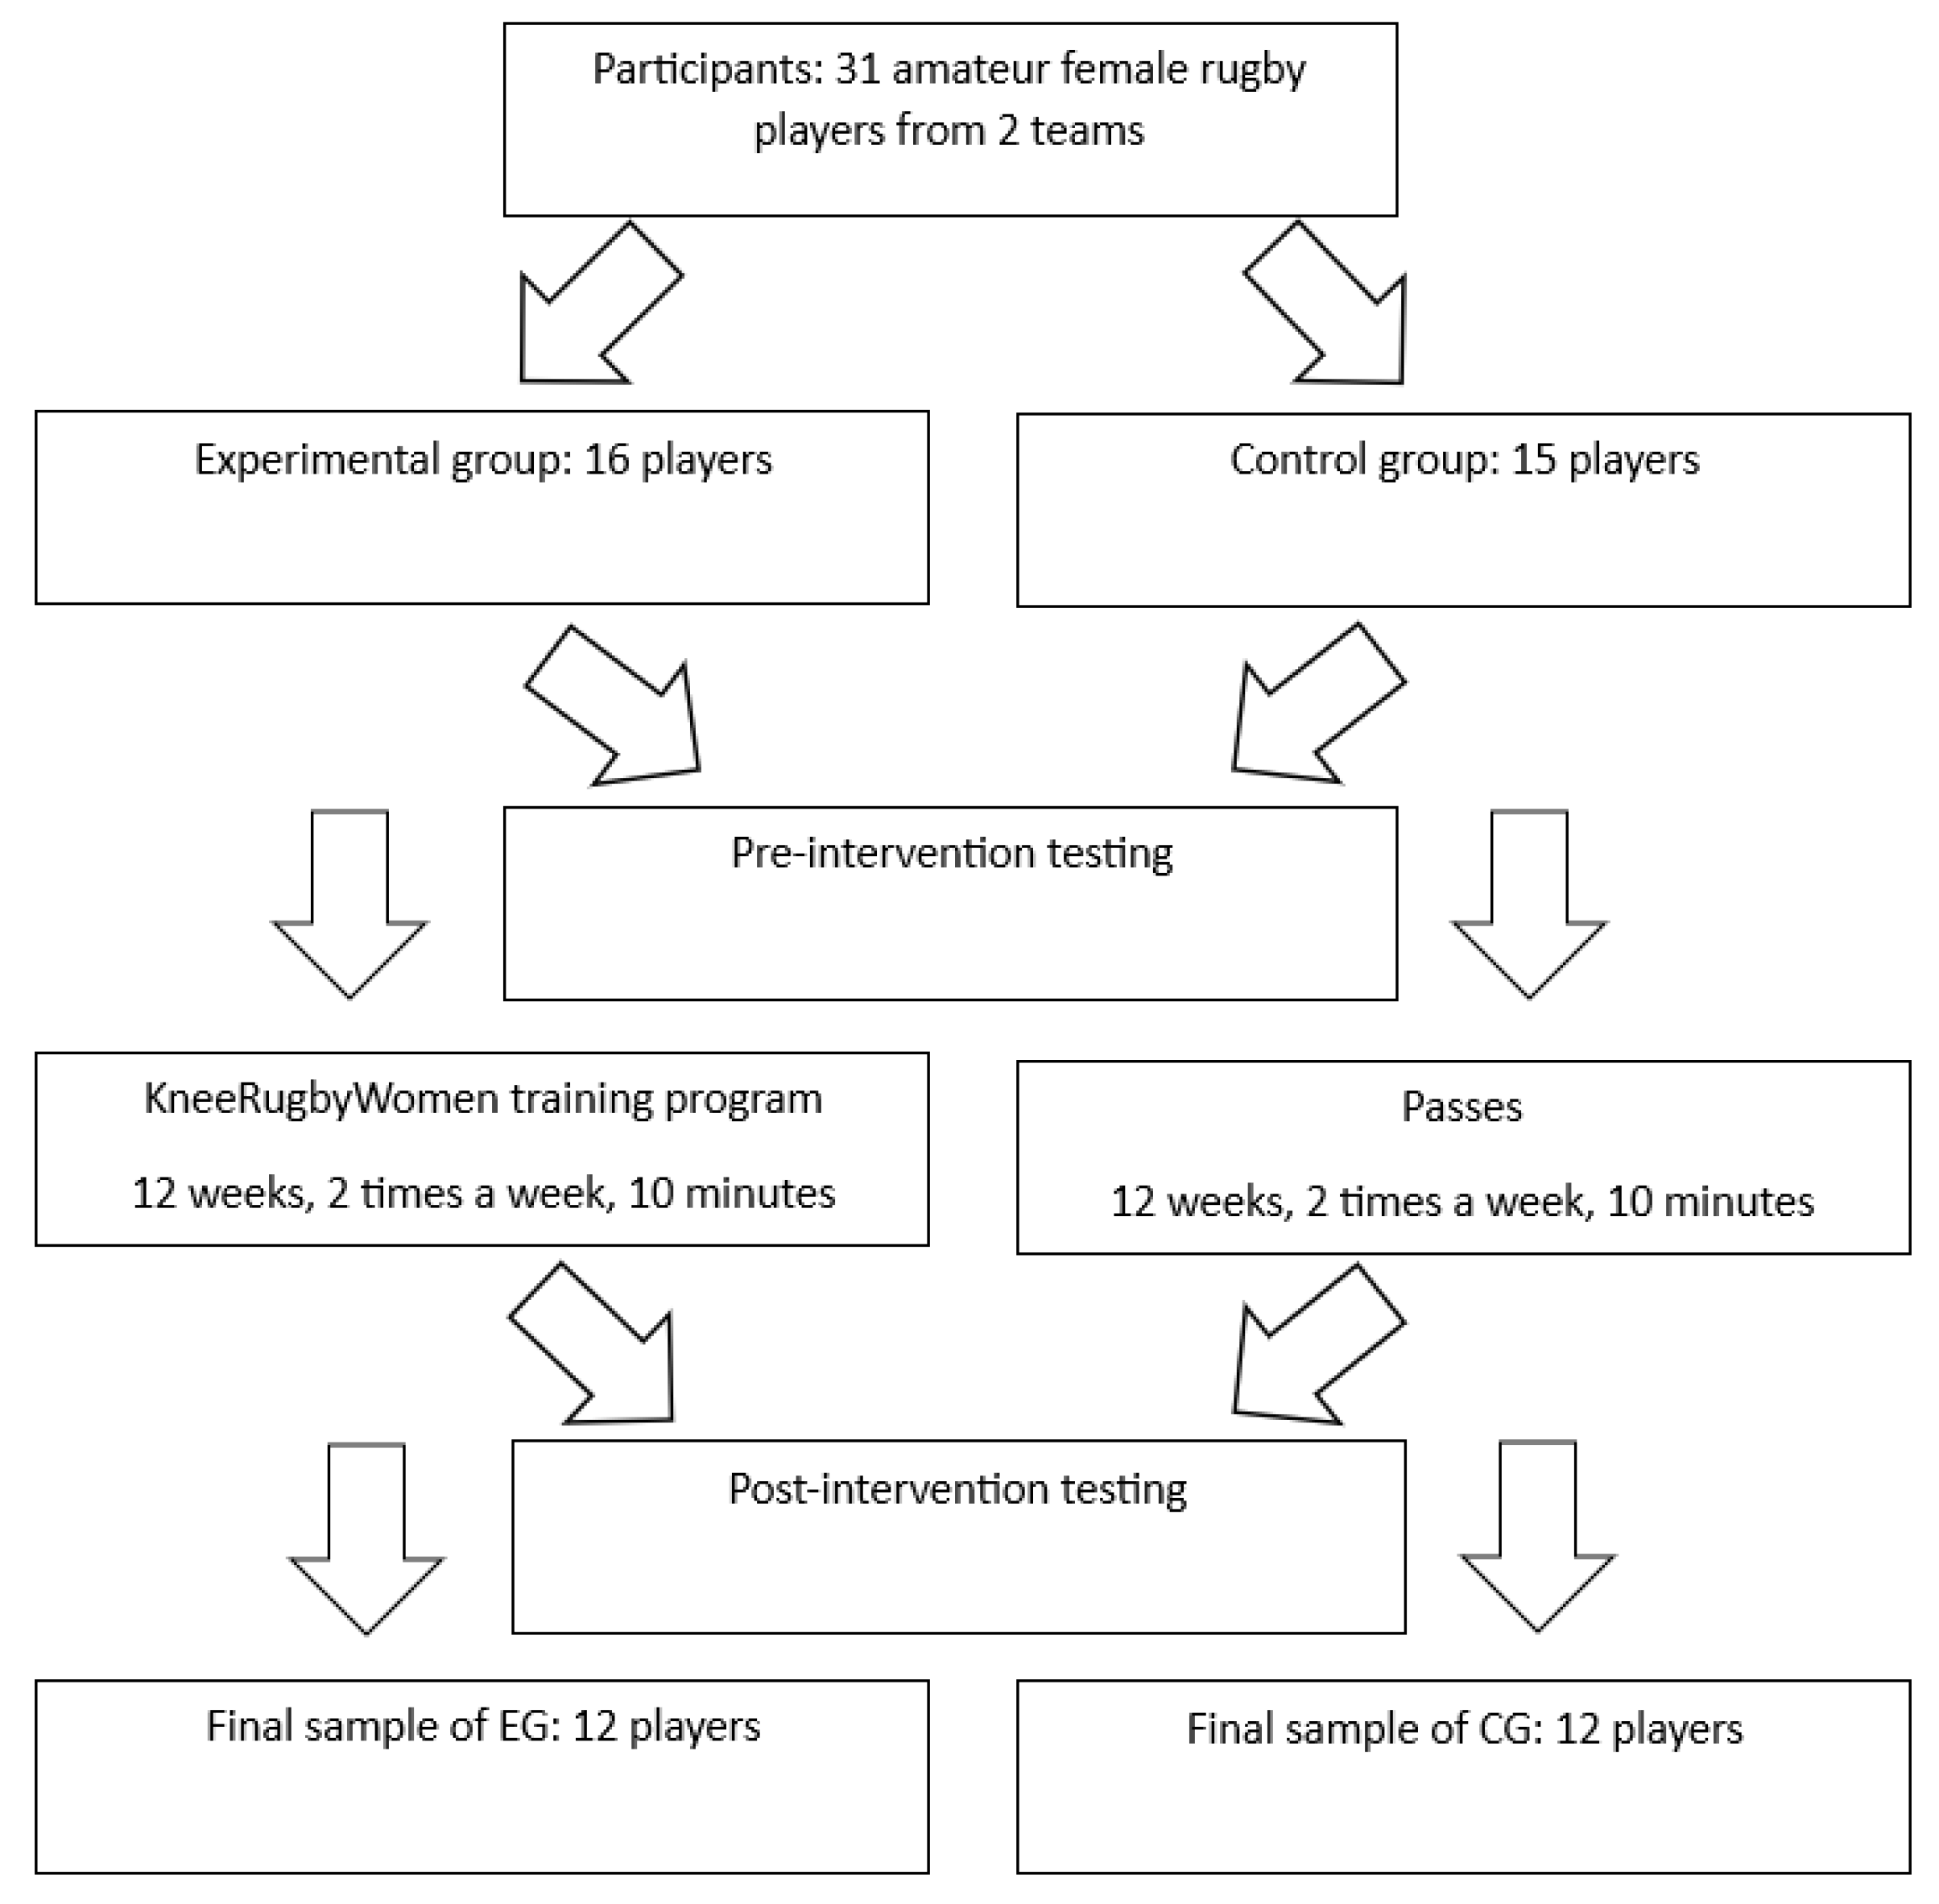 Applied Sciences Free Full-Text The Impact of a Novel Neuromuscular Training Program on Leg Stiffness, Reactive Strength, and Landing Biomechanics in Amateur Female Rugby Players picture